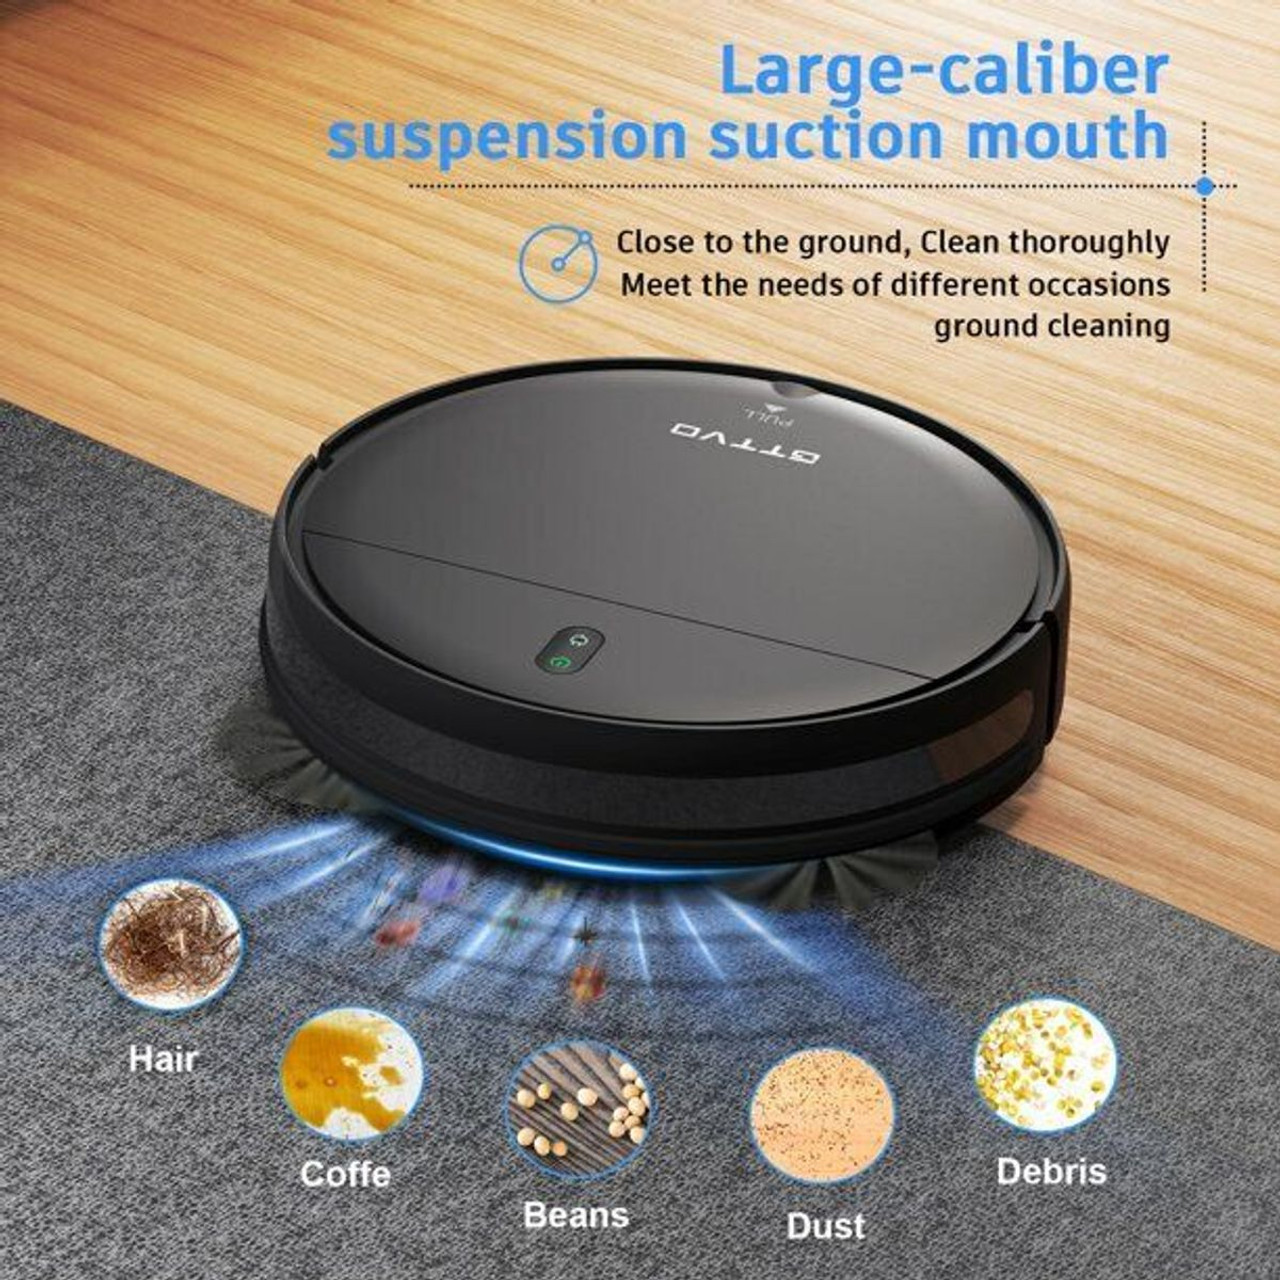 GTTVO BR150 Robot Vacuum Cleaner Mop 2 in 1 Mopping - Black product image